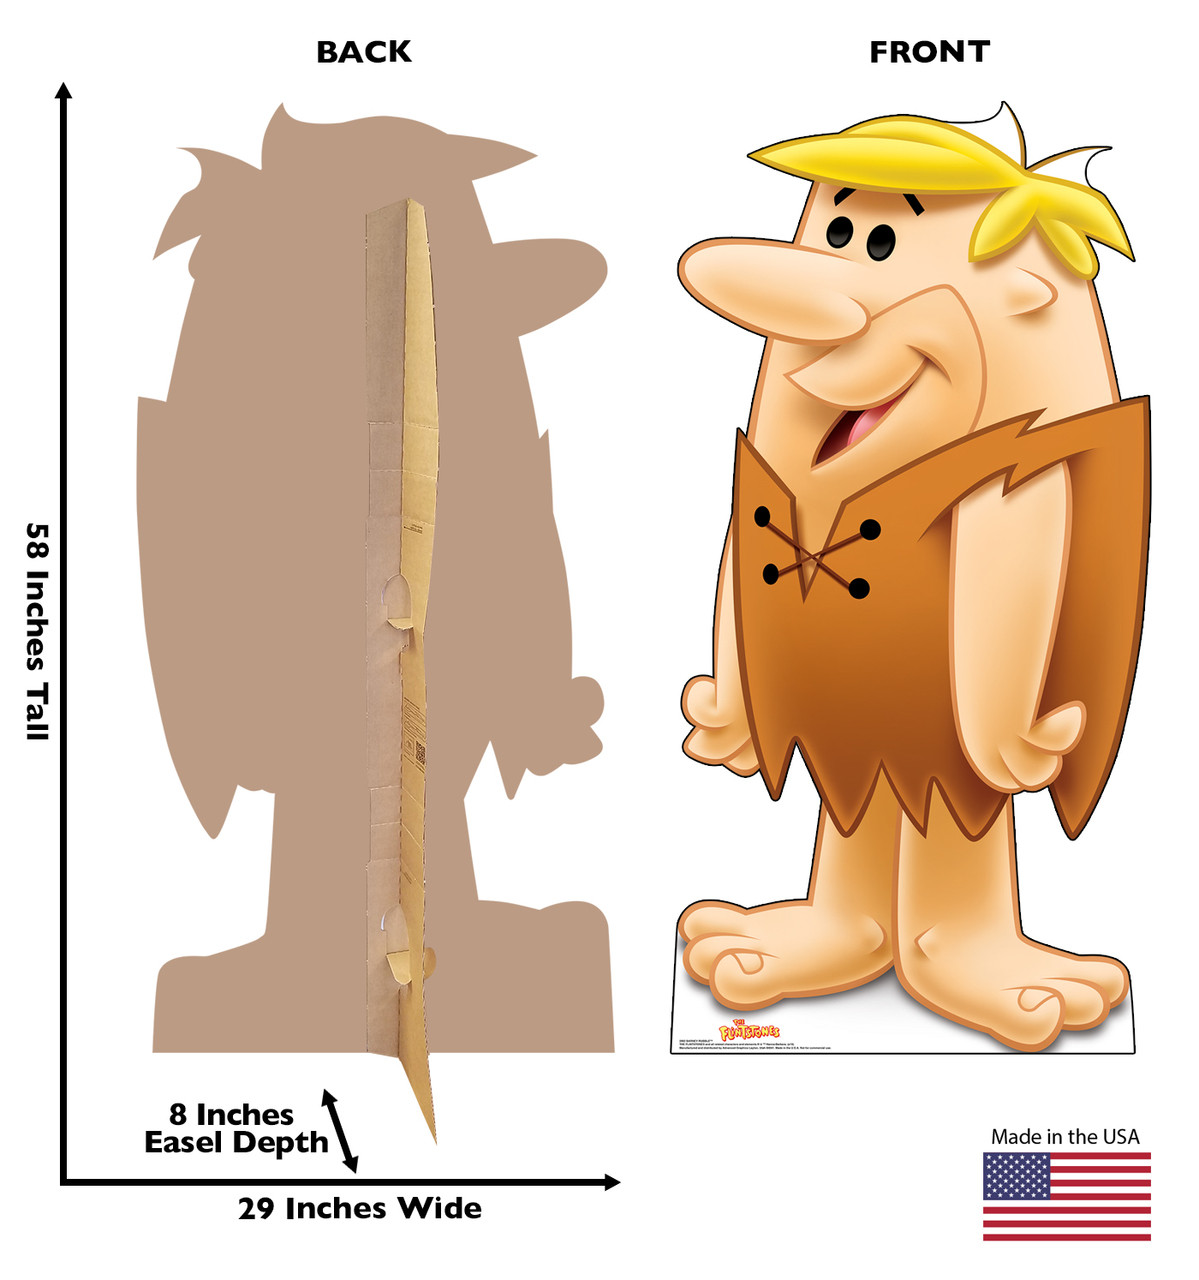 Life-size cardboard standee of Barney Rubble with front and back dimensions.